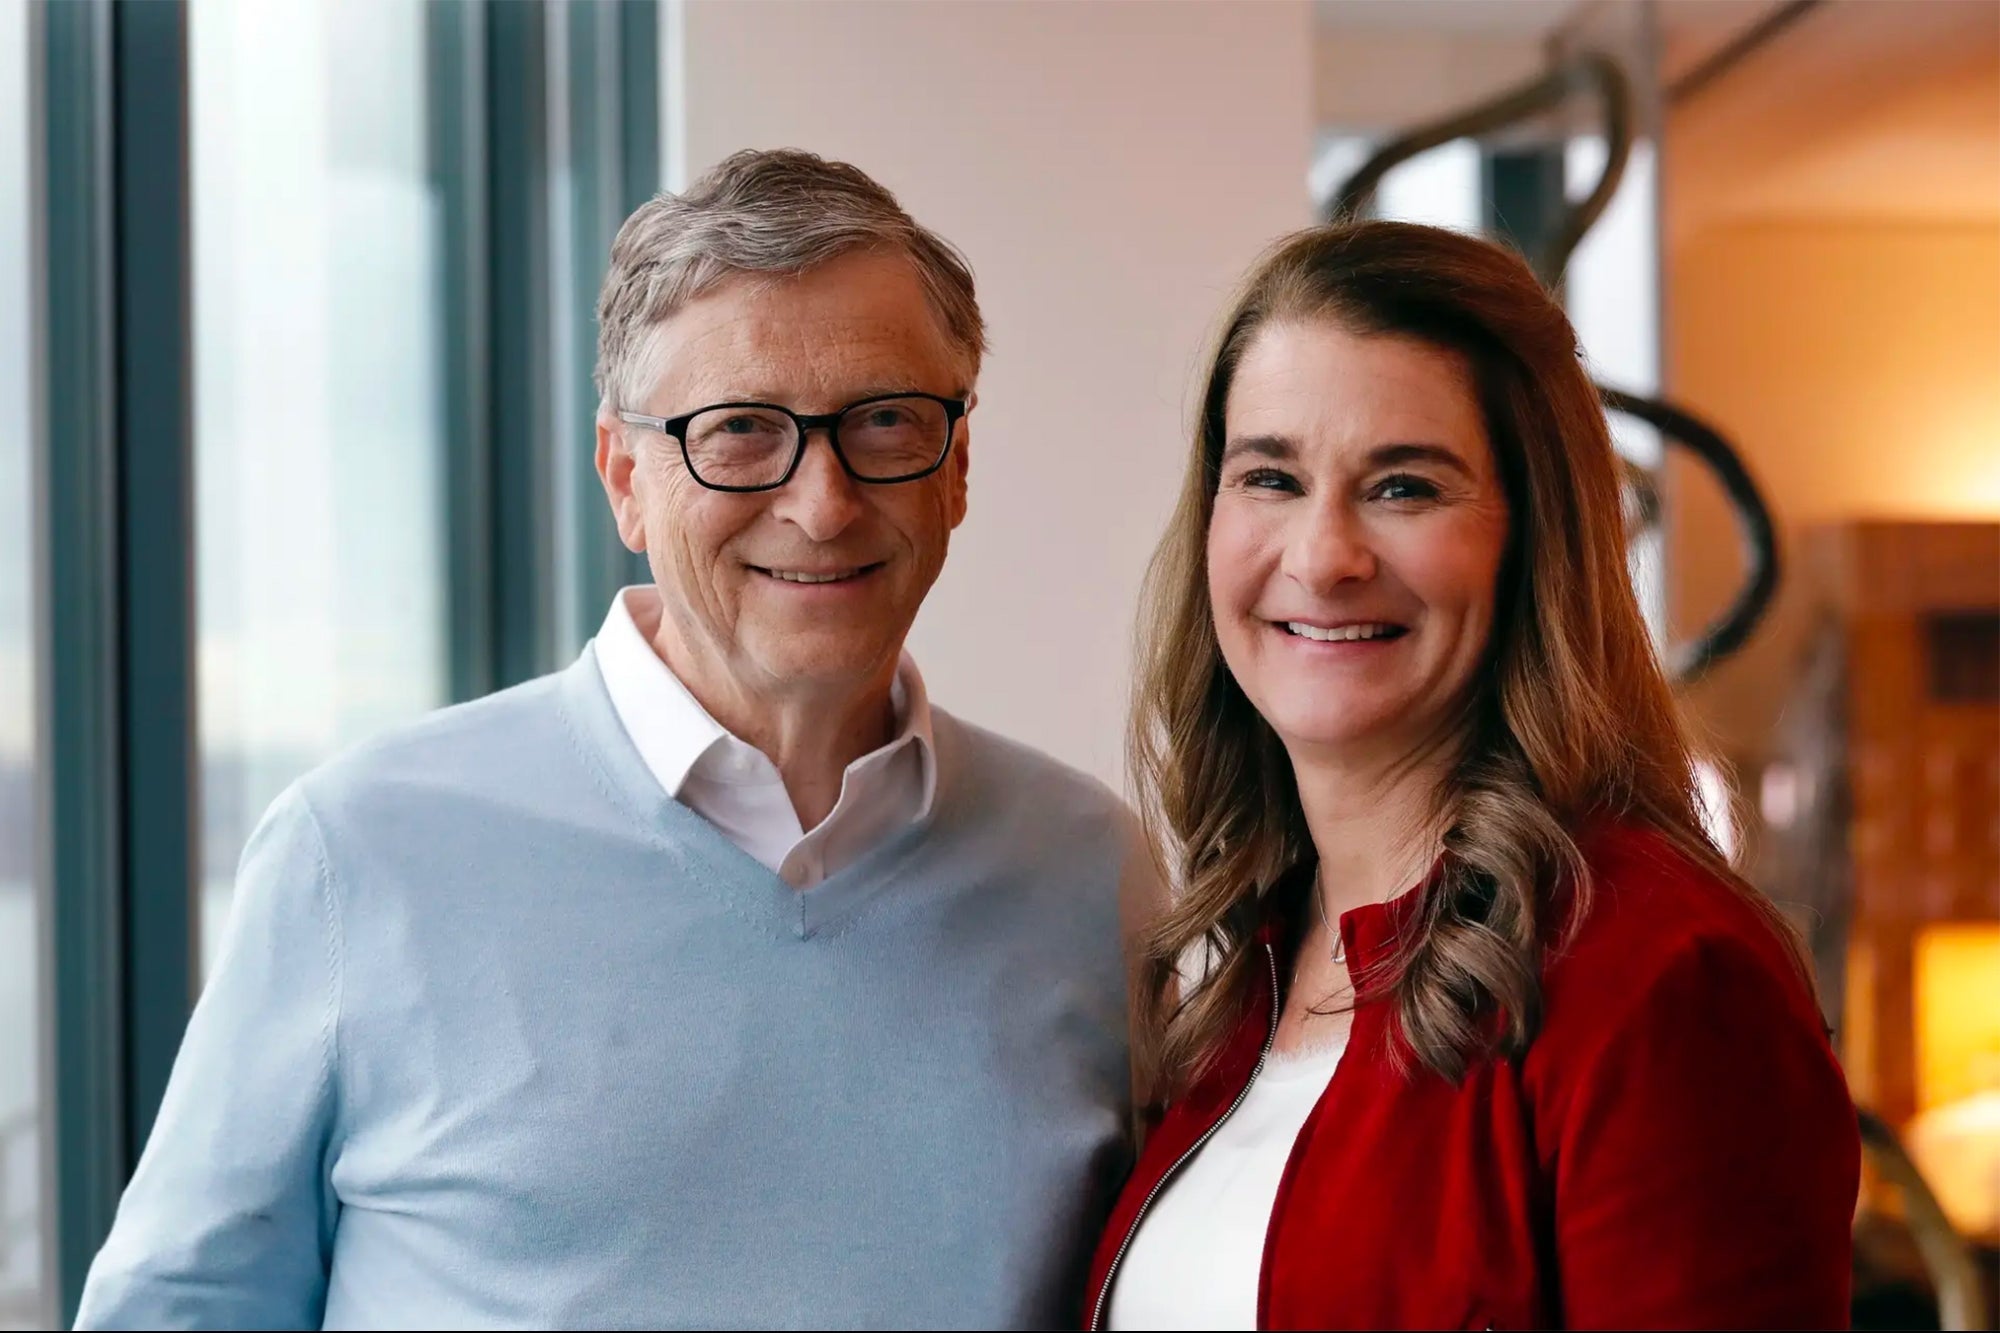 In her first interview since their split, Melinda Gates finally disclosed why she divorced Bill Gates. His relationship with Jeffrey Epstein is revealed.